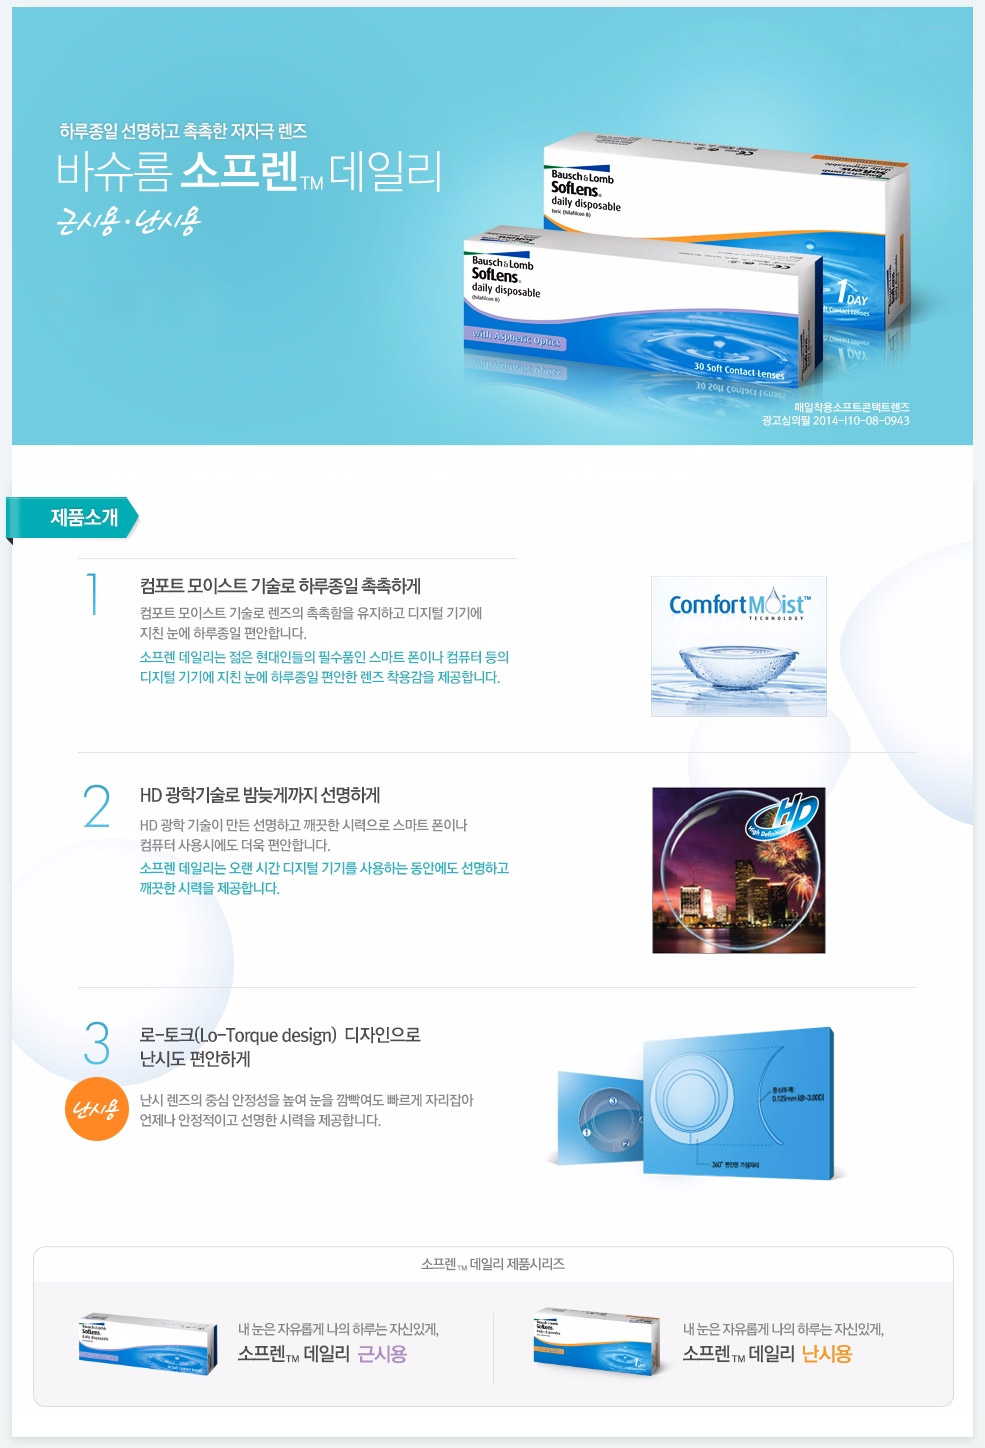 Sixth description images of Bausch & Lomb 1-day Soflens Clear Contact Lenses (30pcs)